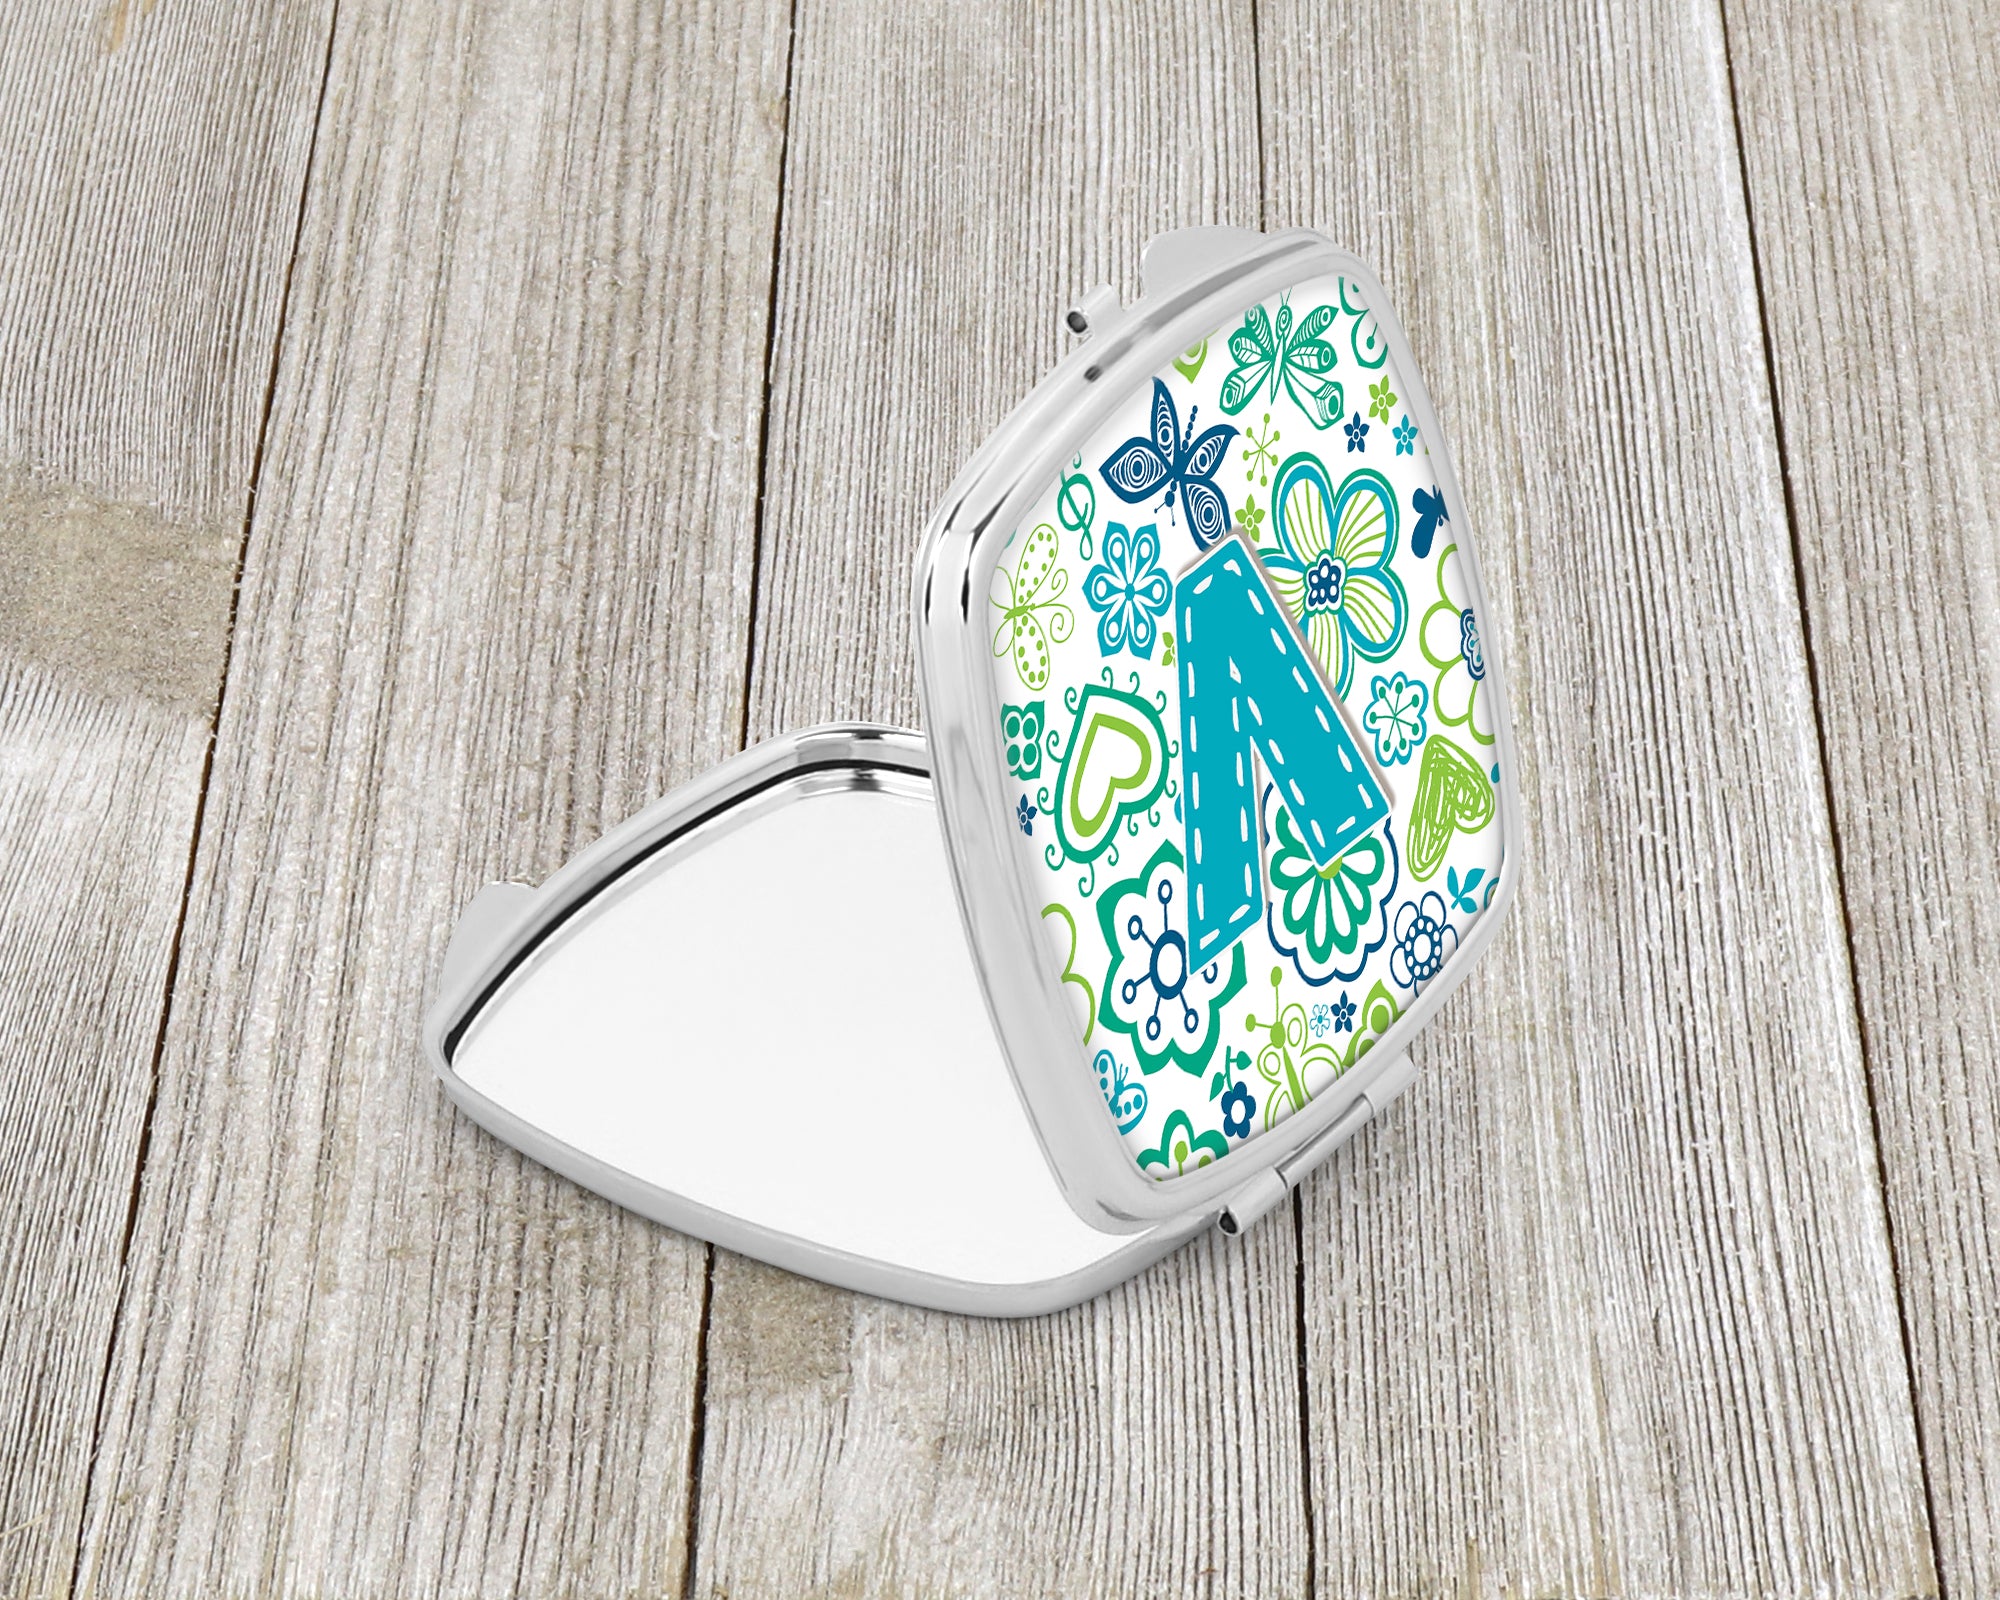 Letter V Flowers and Butterflies Teal Blue Compact Mirror CJ2006-VSCM